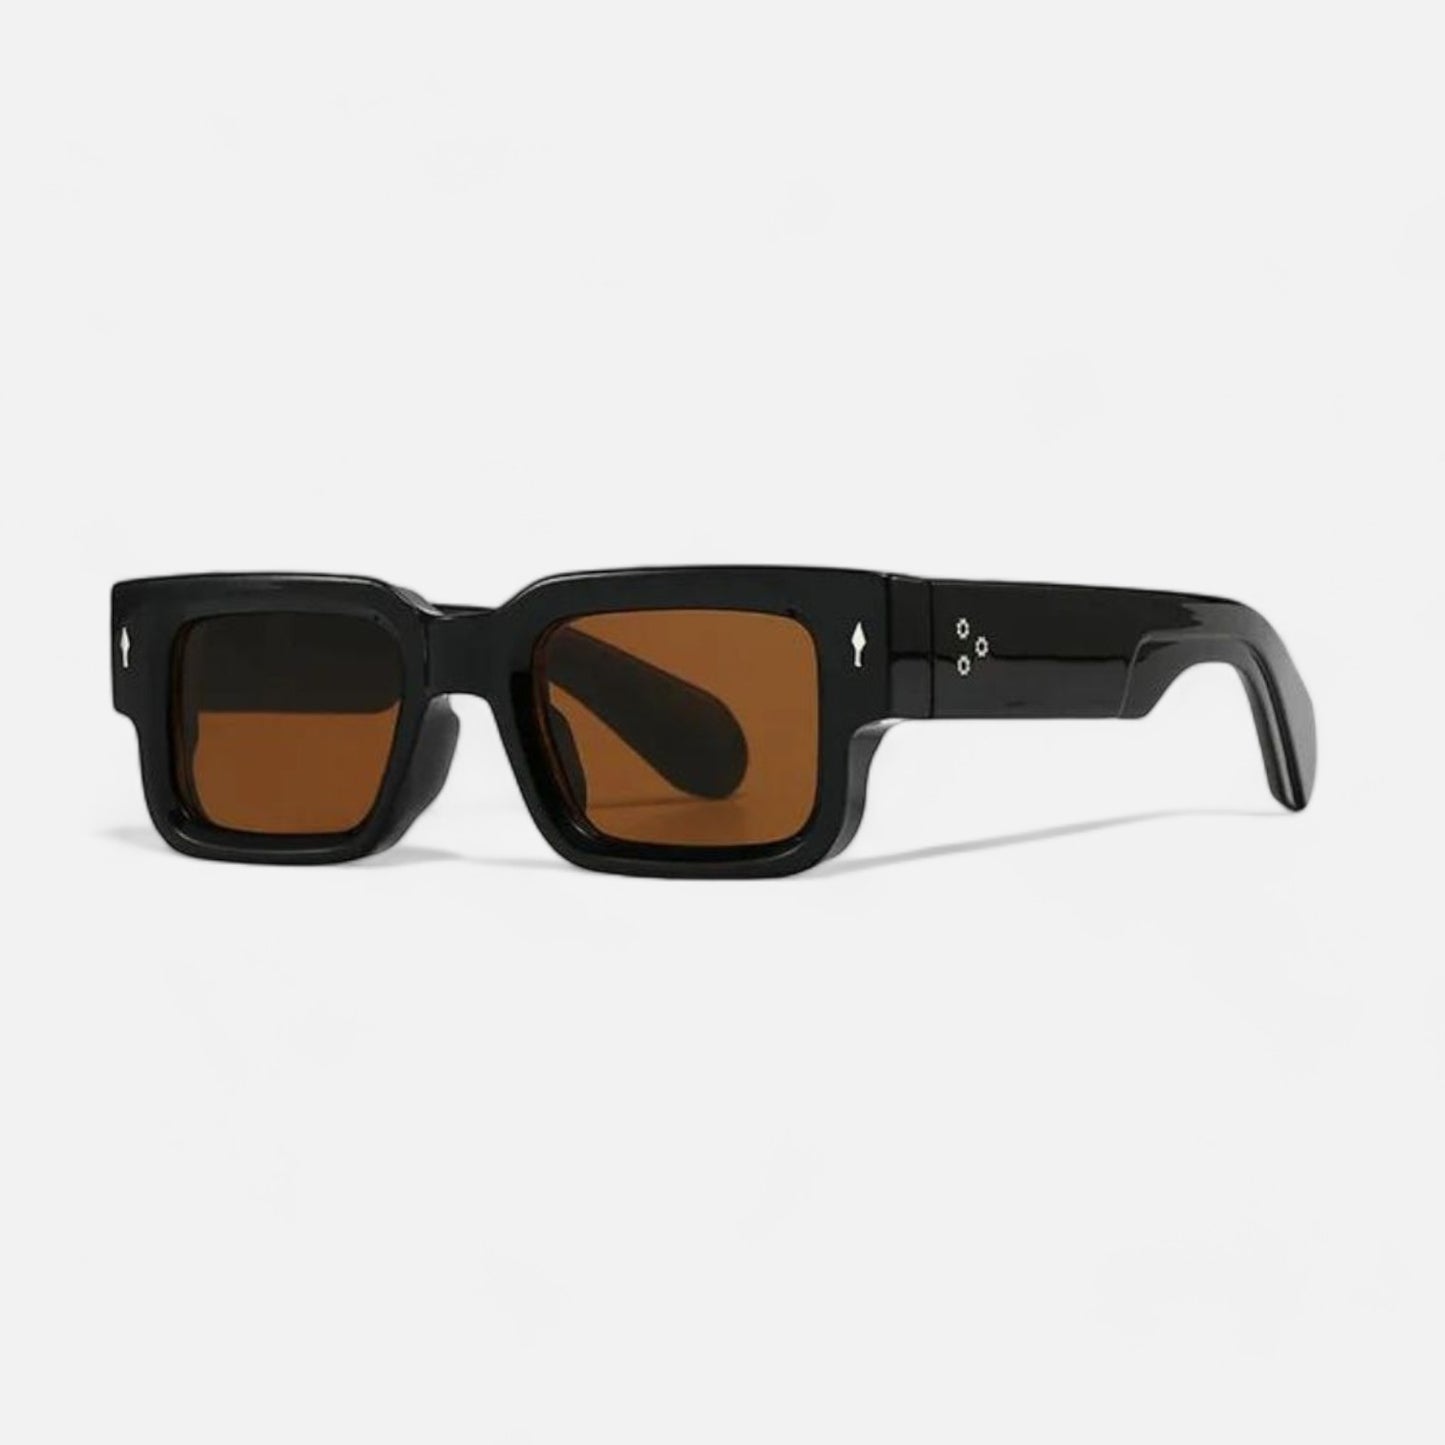 The Hyperion Sunglasses